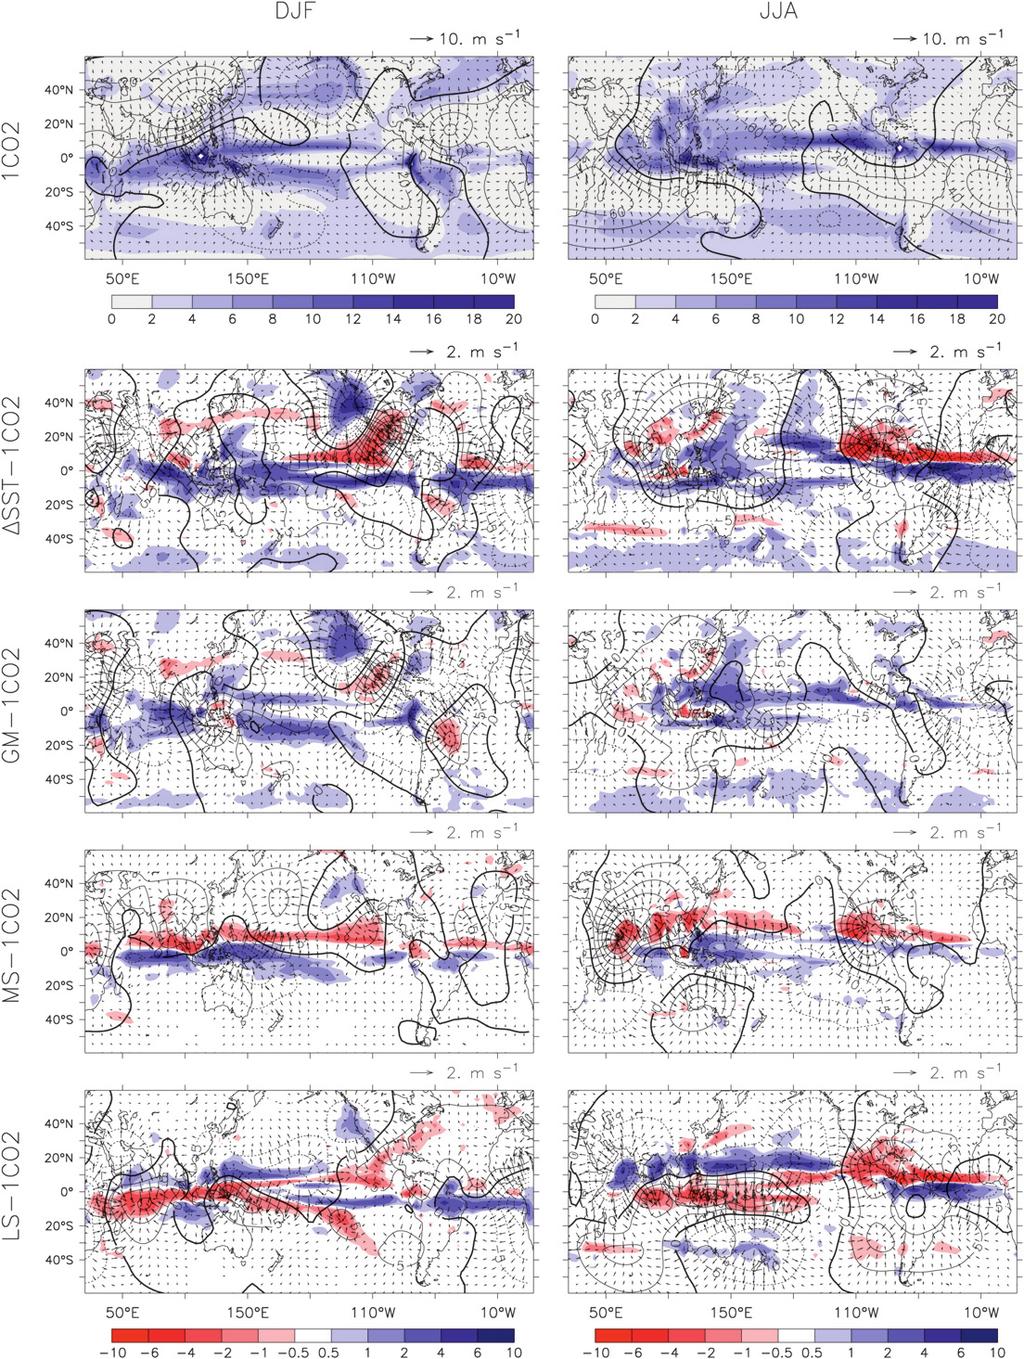 4002 JOURNAL OF CLIMATE VOLUME 22 FIG. 7.